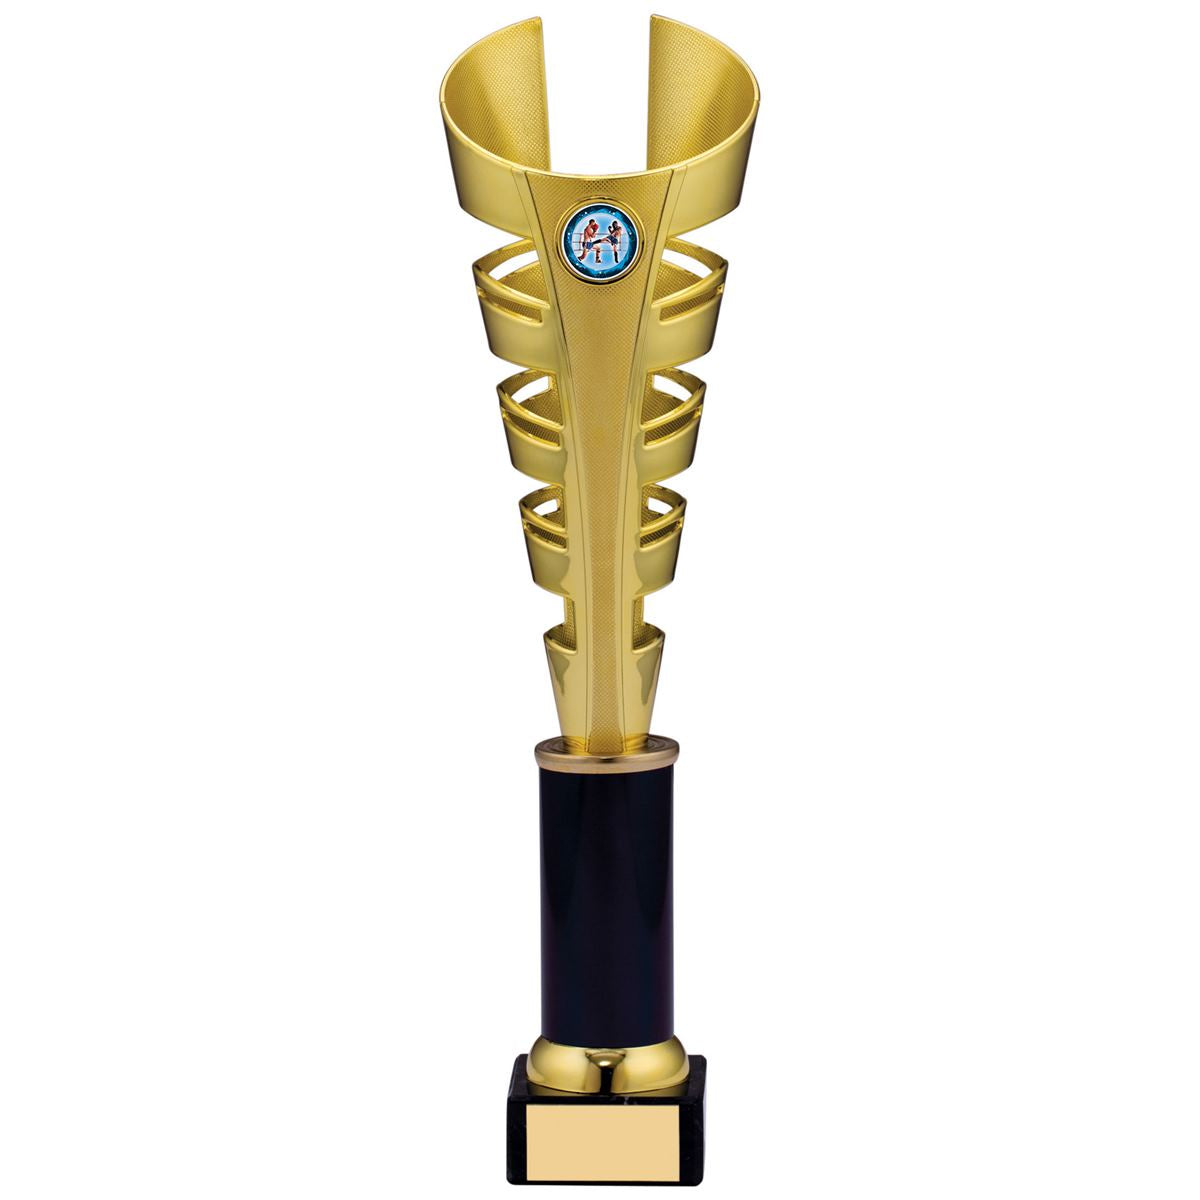 Tower Trophy Spiral Award in Gold and Black - A Size